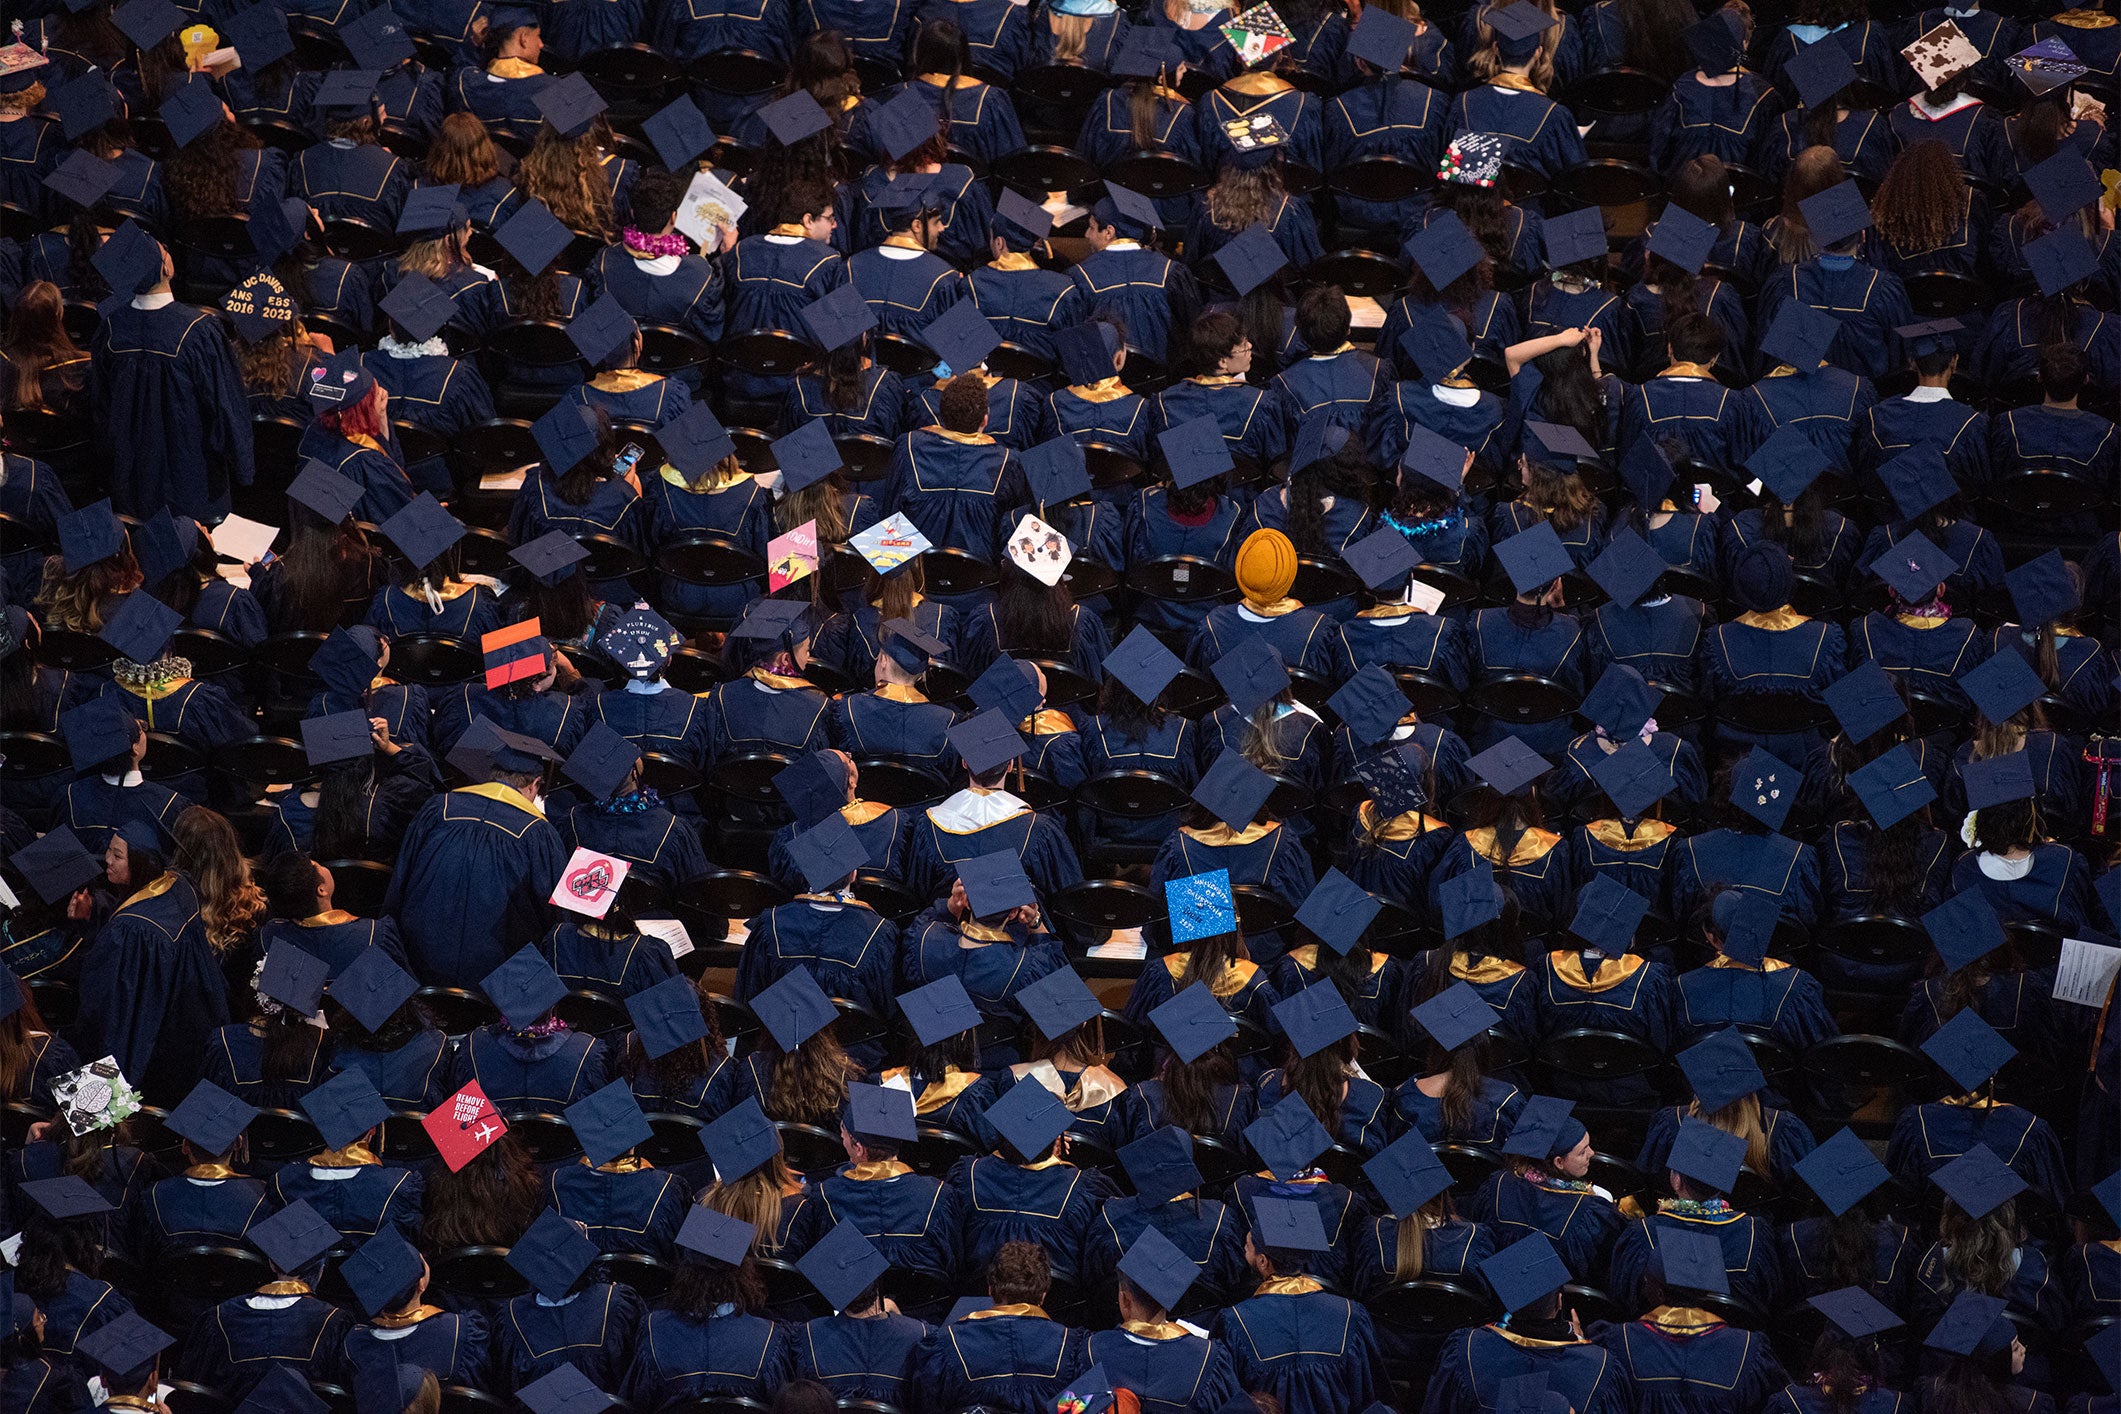 A momentous day for UC Davis graduates, adorned in their academic regalia, marking the culmination of their hard work at the commencement ceremony at the Golden One Center in Sacramento in June 2023. (Gregory Urquiaga/UC Davis)